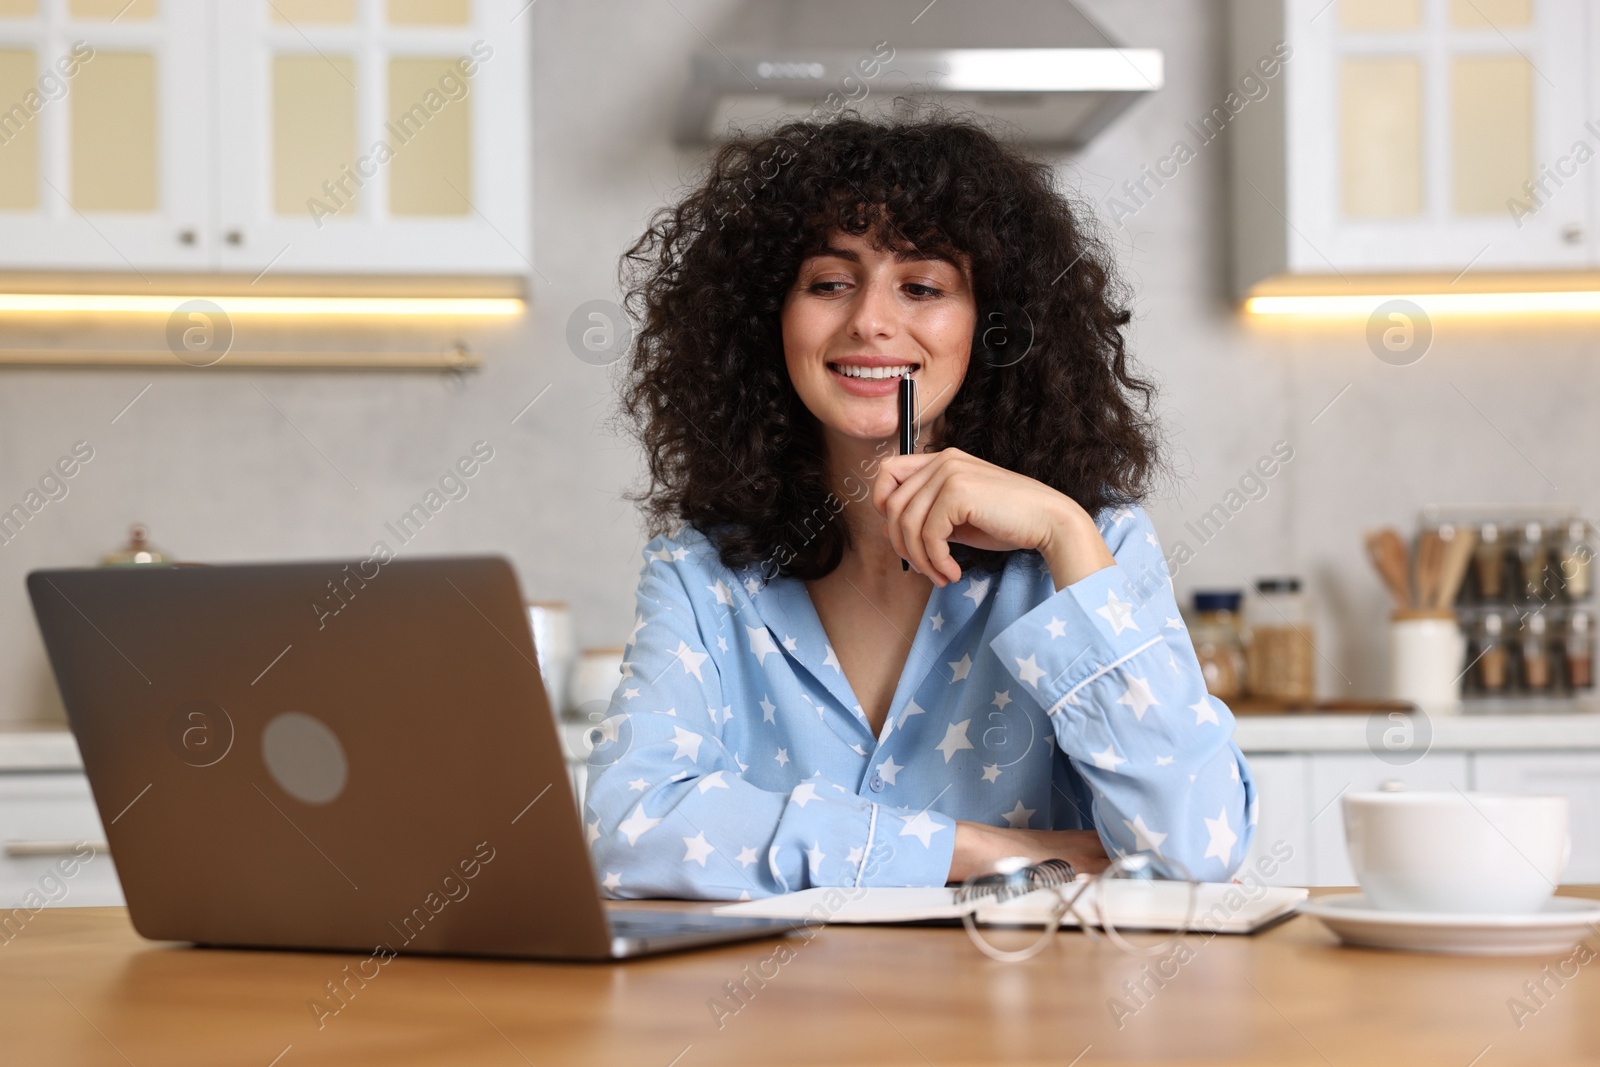 Photo of Beautiful young woman in stylish pyjama with pen using laptop at wooden table in kitchen